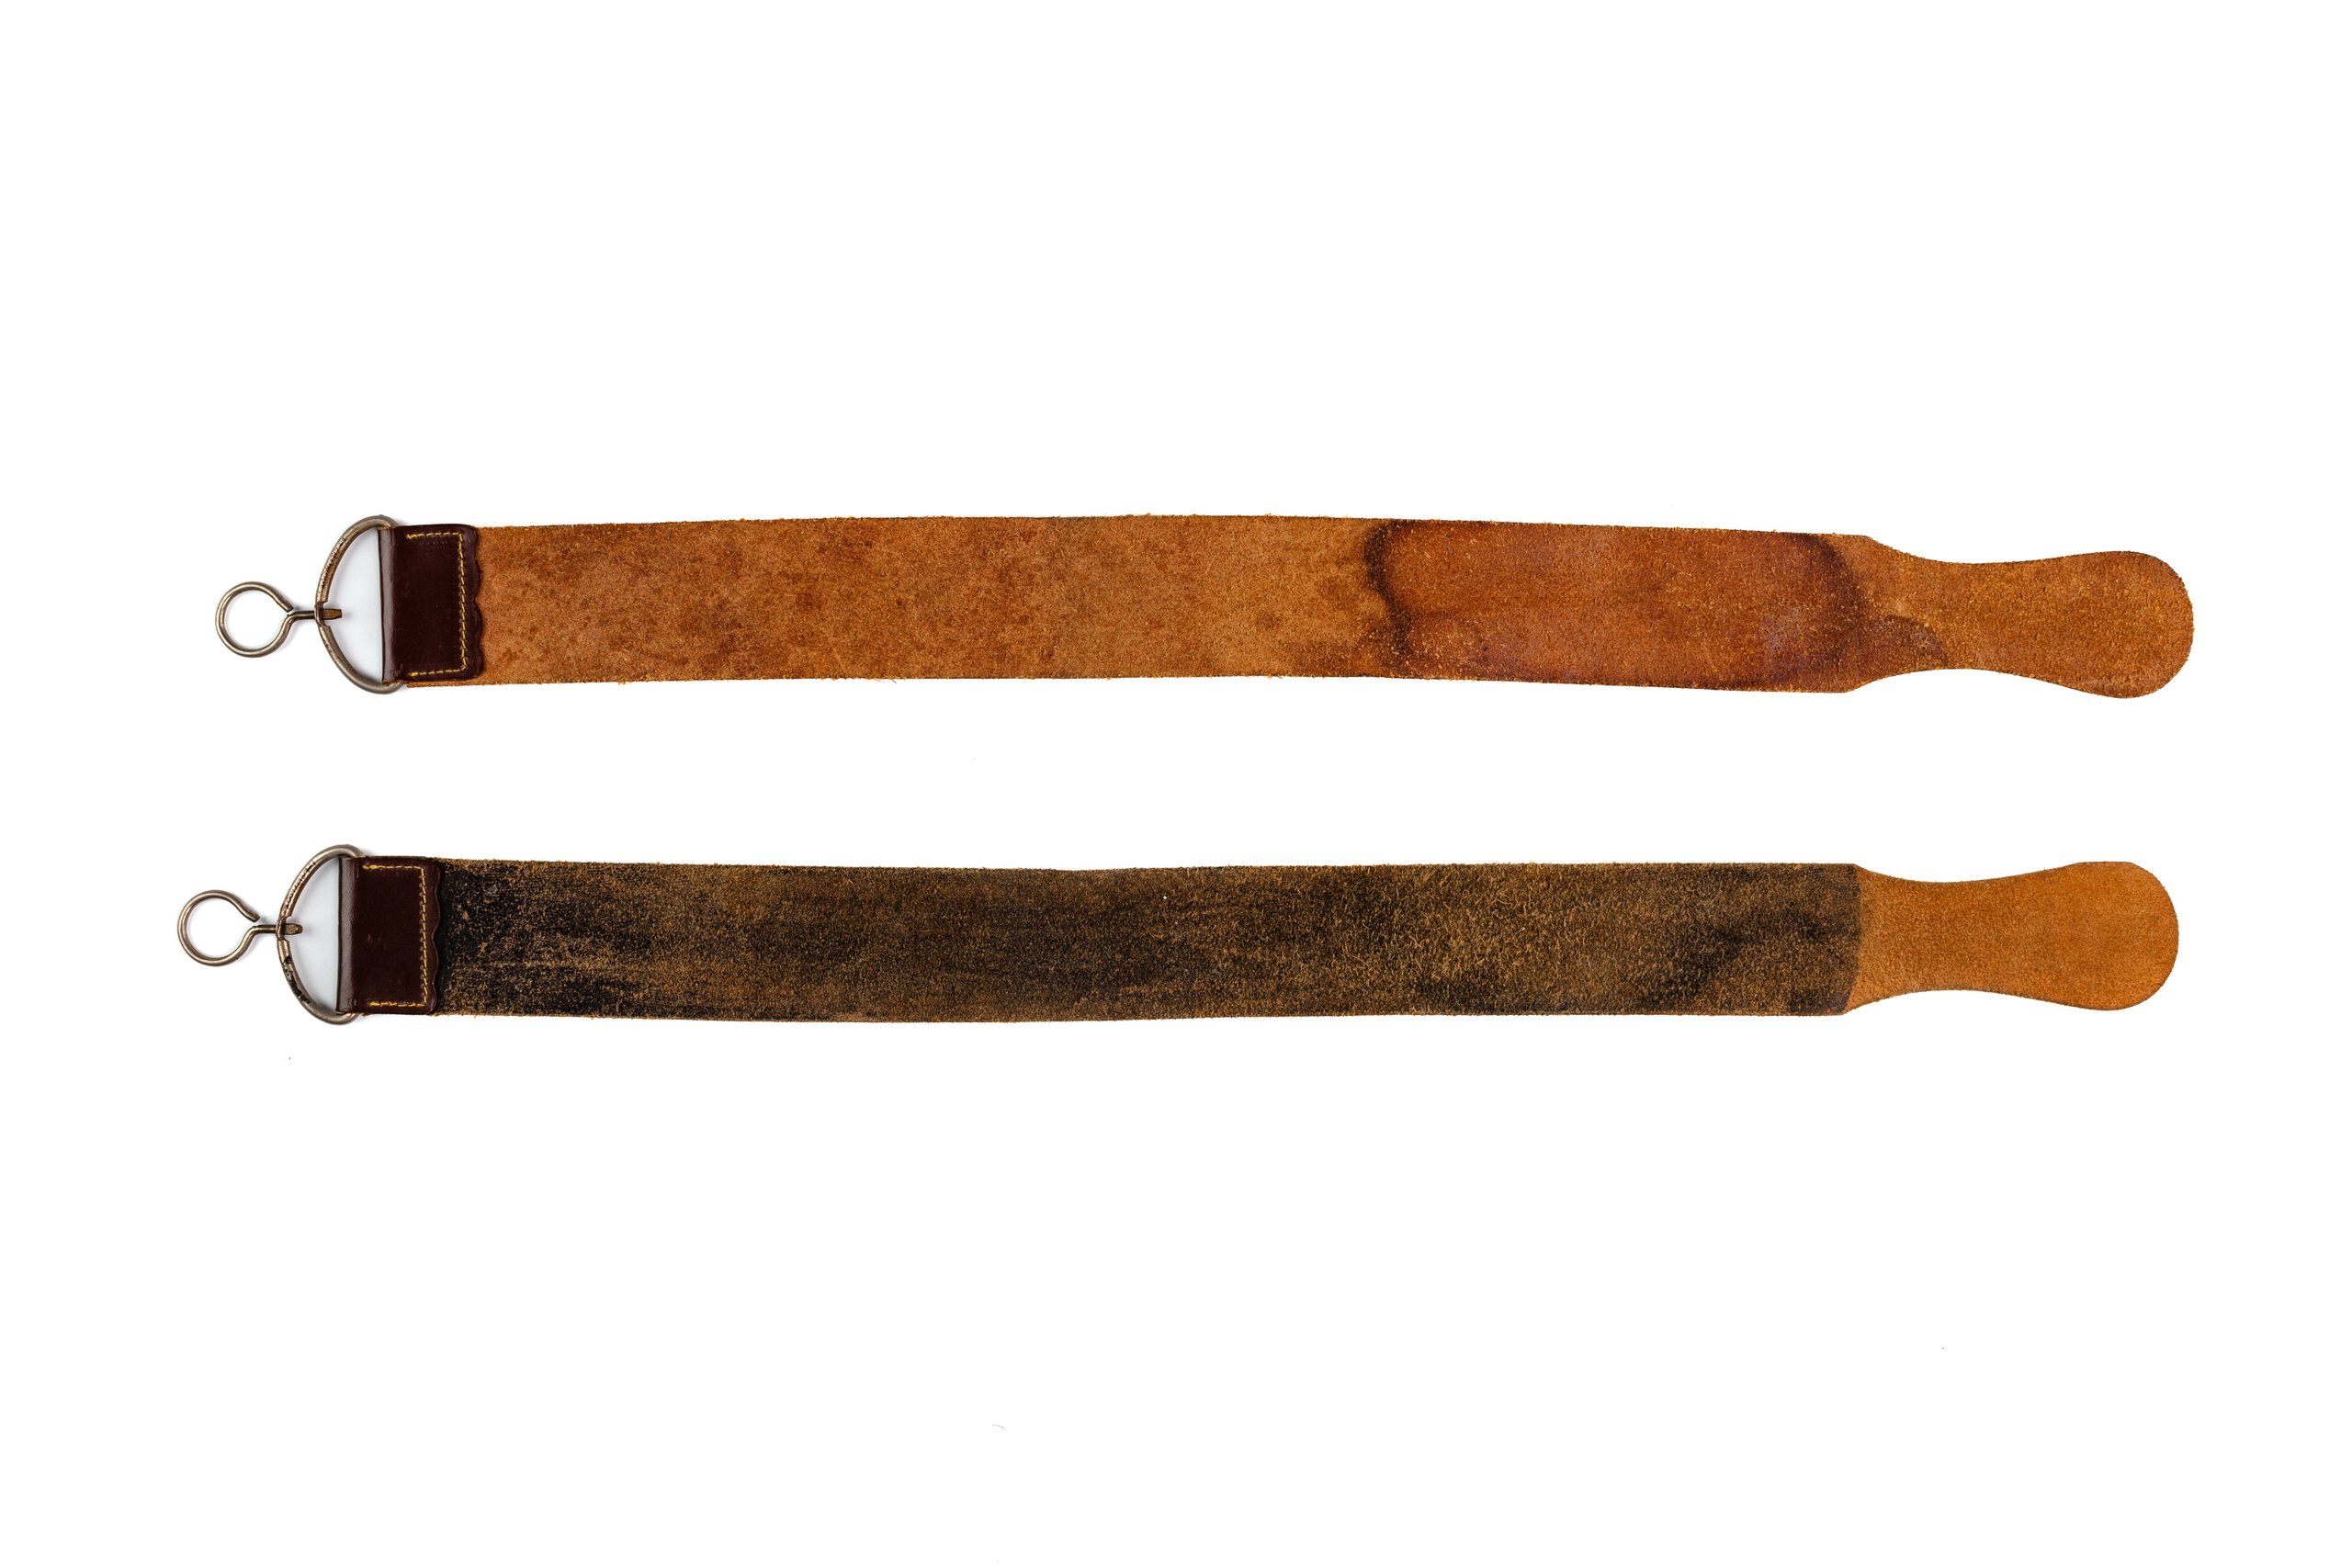 Leather strops